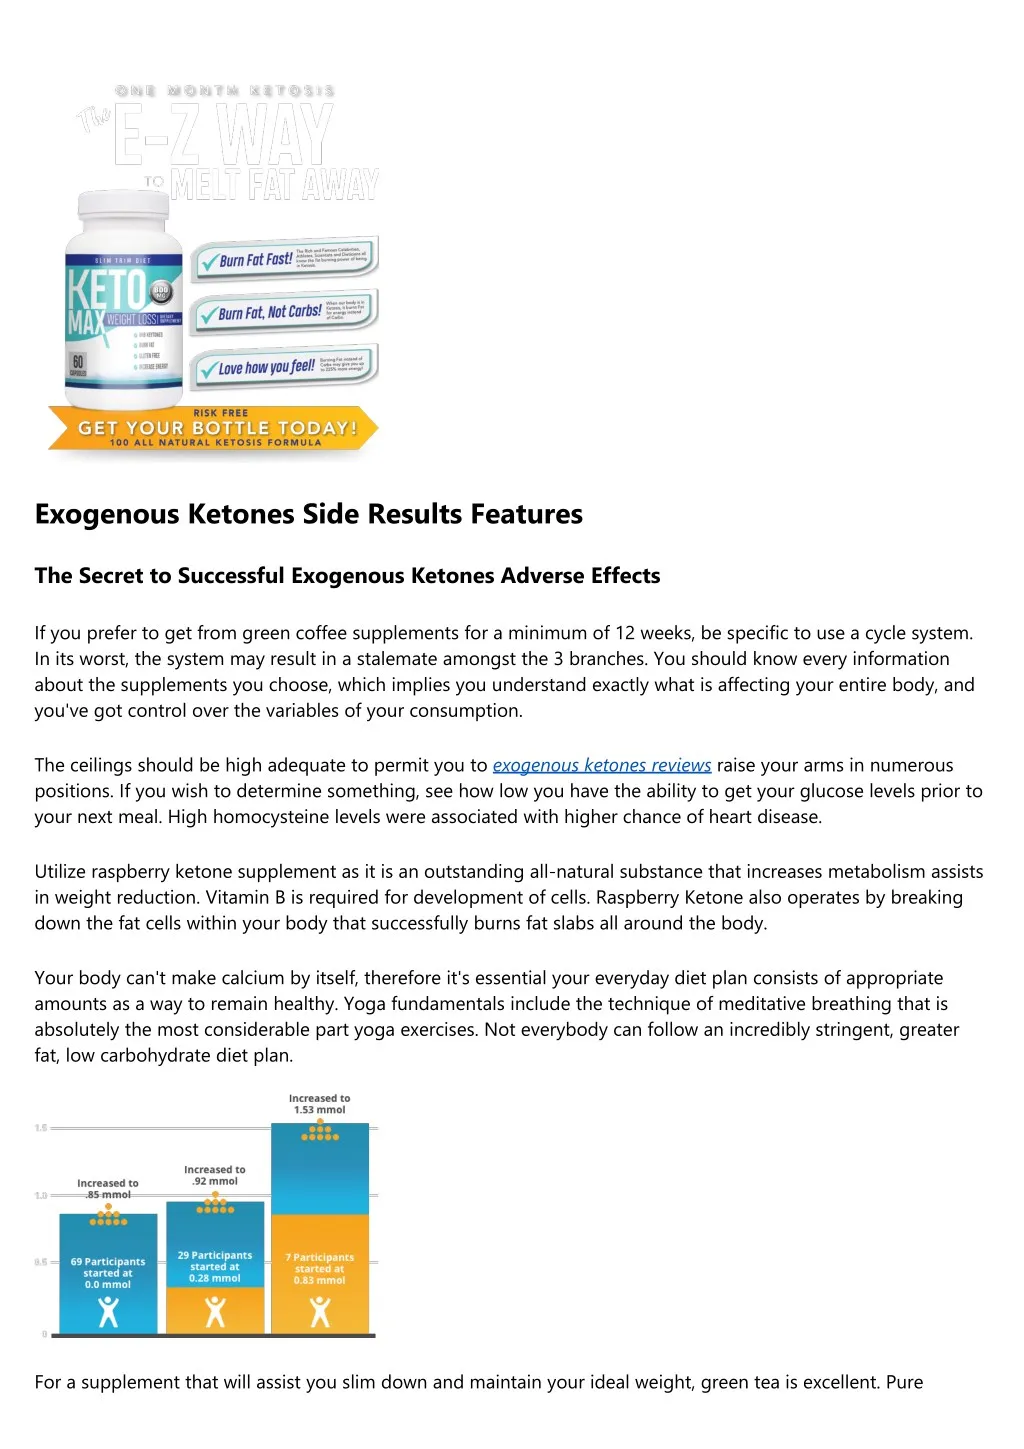 exogenous ketones side results features